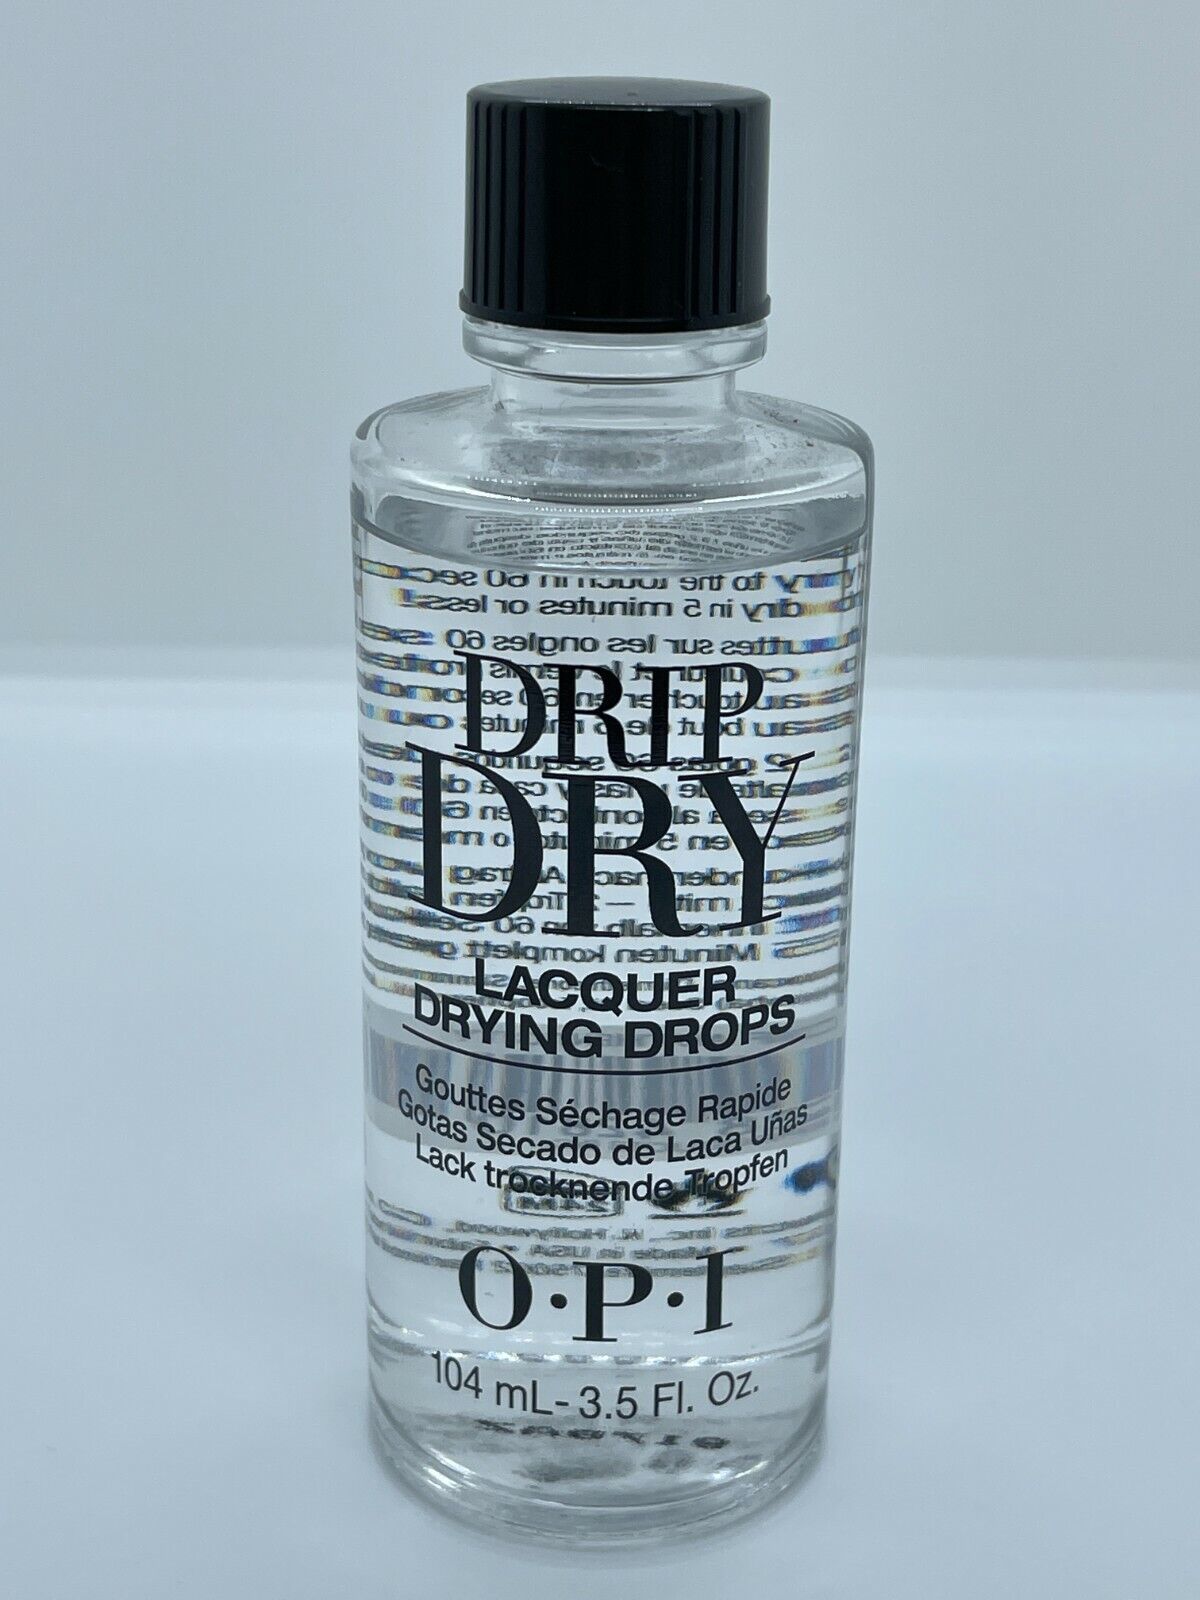 OPI Drip Dry Lacquer Drying Drops 3.5 oz 104 ml Nail Care - $33.26